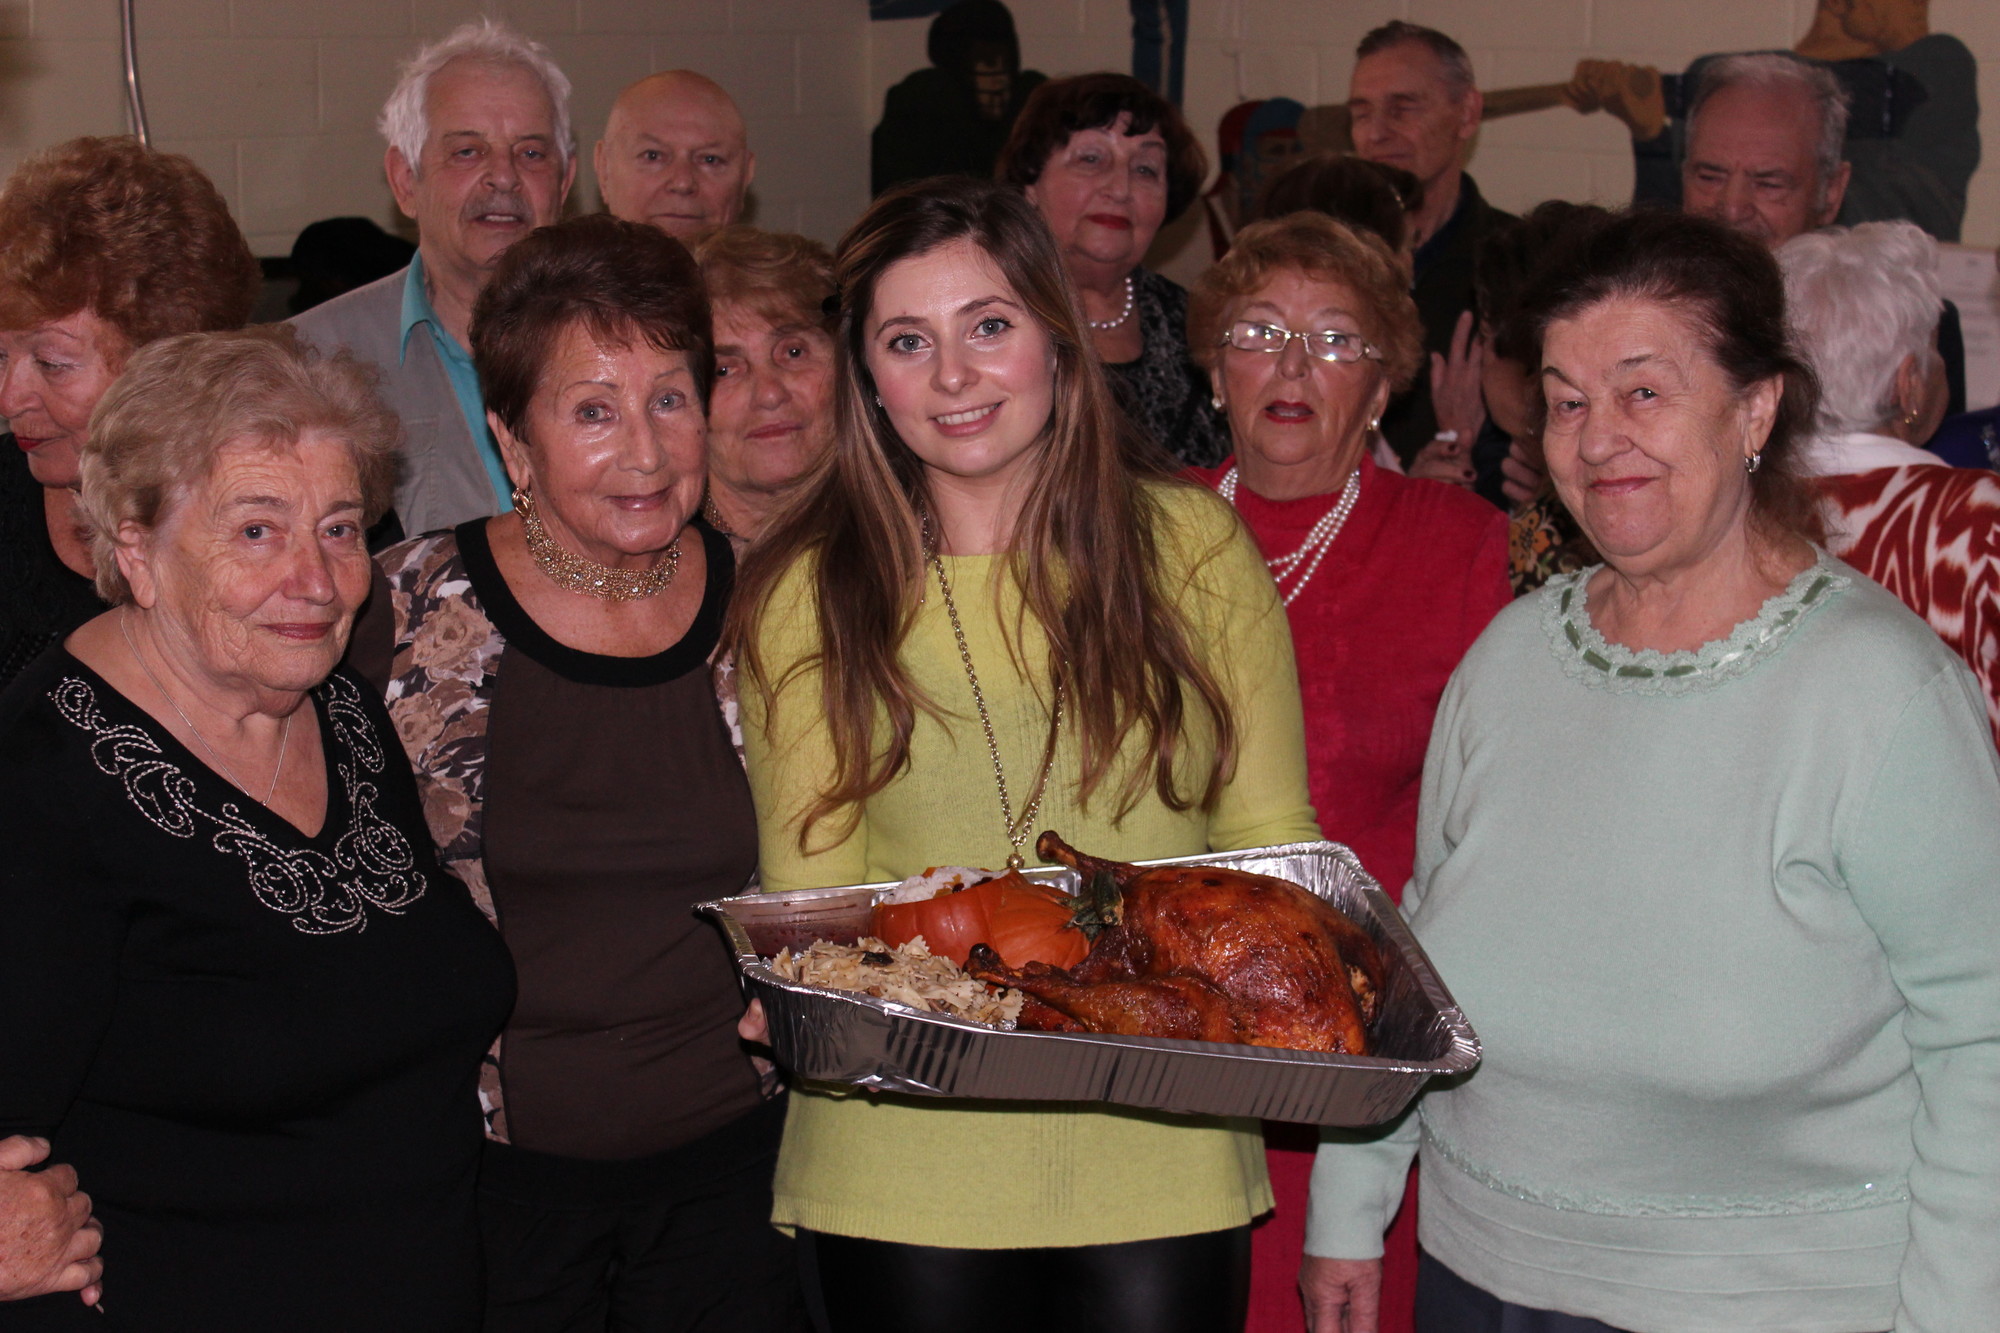 The Russian Division, a component of the JCC of the Greater Five Towns, hosted a thanksgiving dinner for their senior citizens. From left are the division’s assistant program director Yulia Gross, staff member Yelena Feldman, program directors Albert Barskiy and Irma Vainblatt and case manager Diana Zelmanovich.